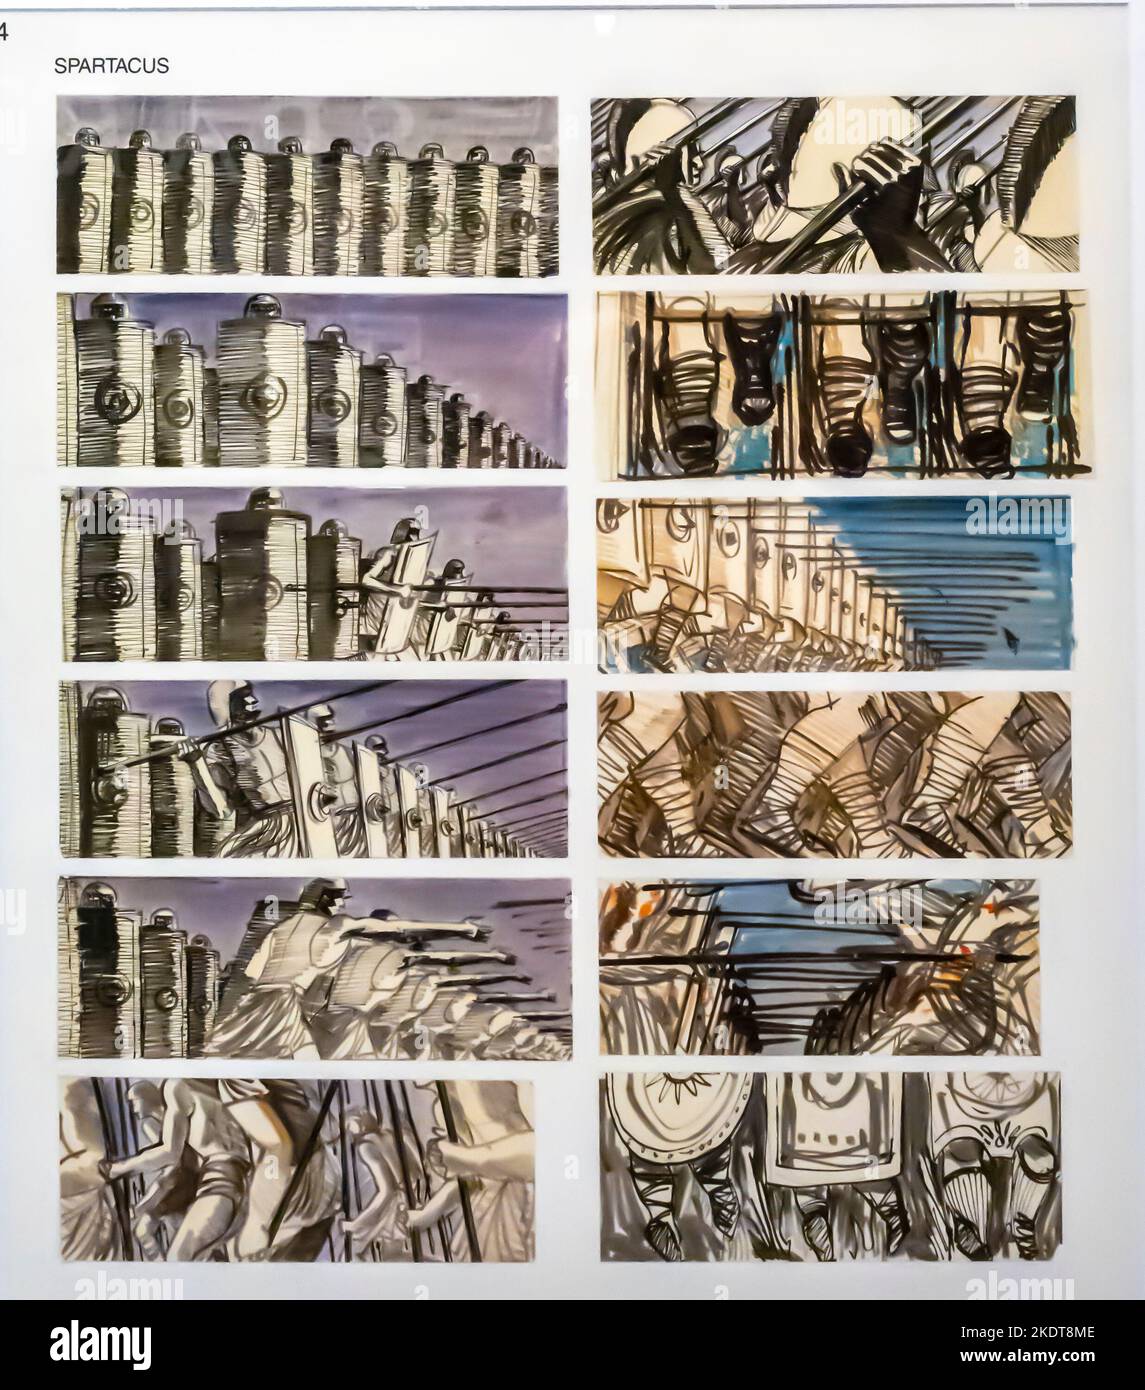 Storyboard of different sequences from Spartacus, 1960, by artist Saul Bass Stock Photo